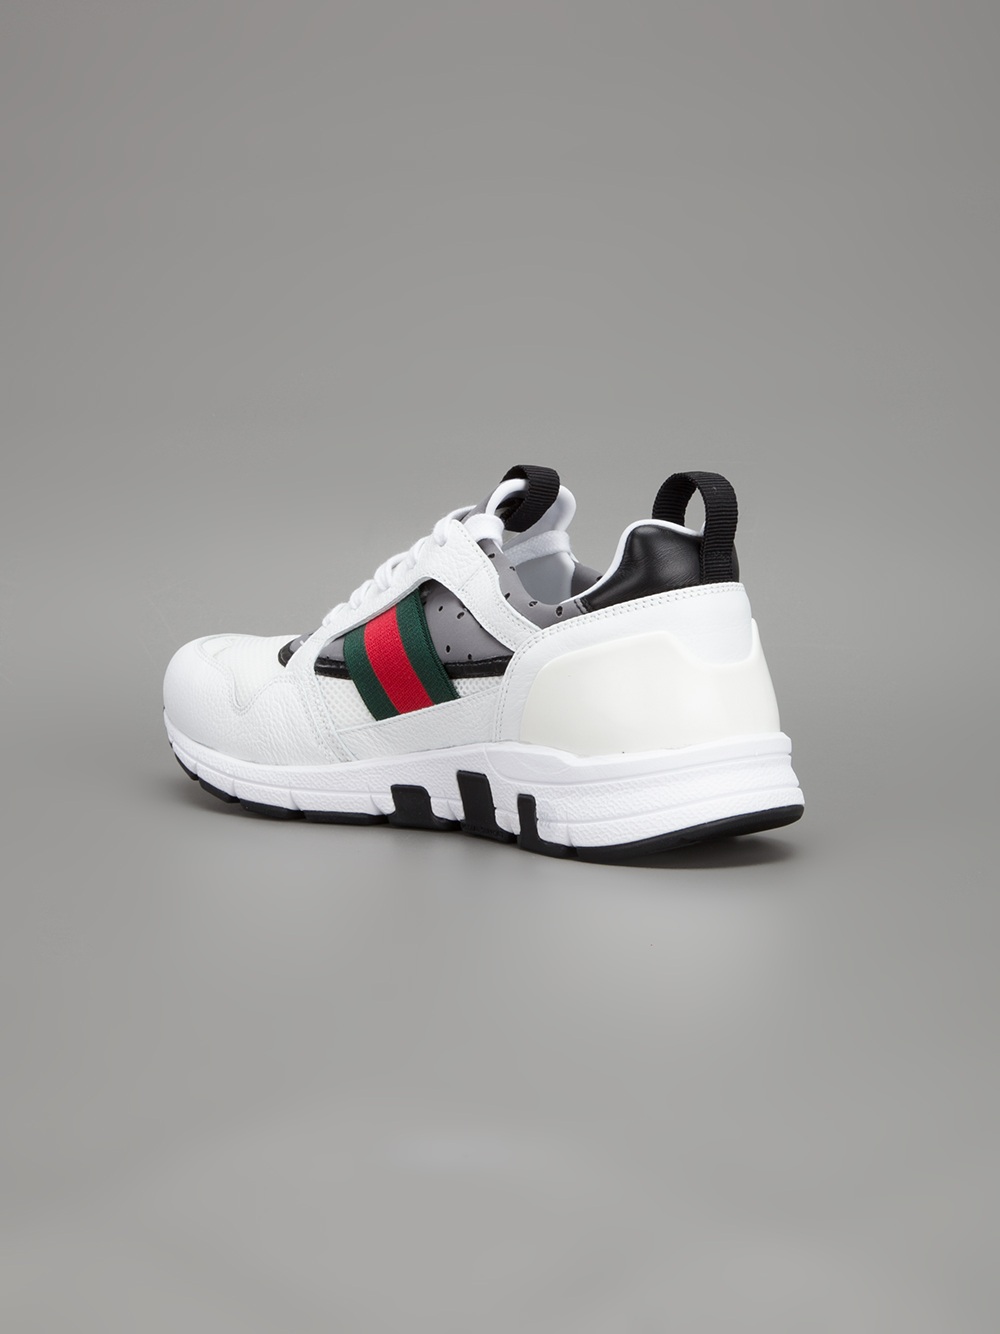 gucci mens running shoes